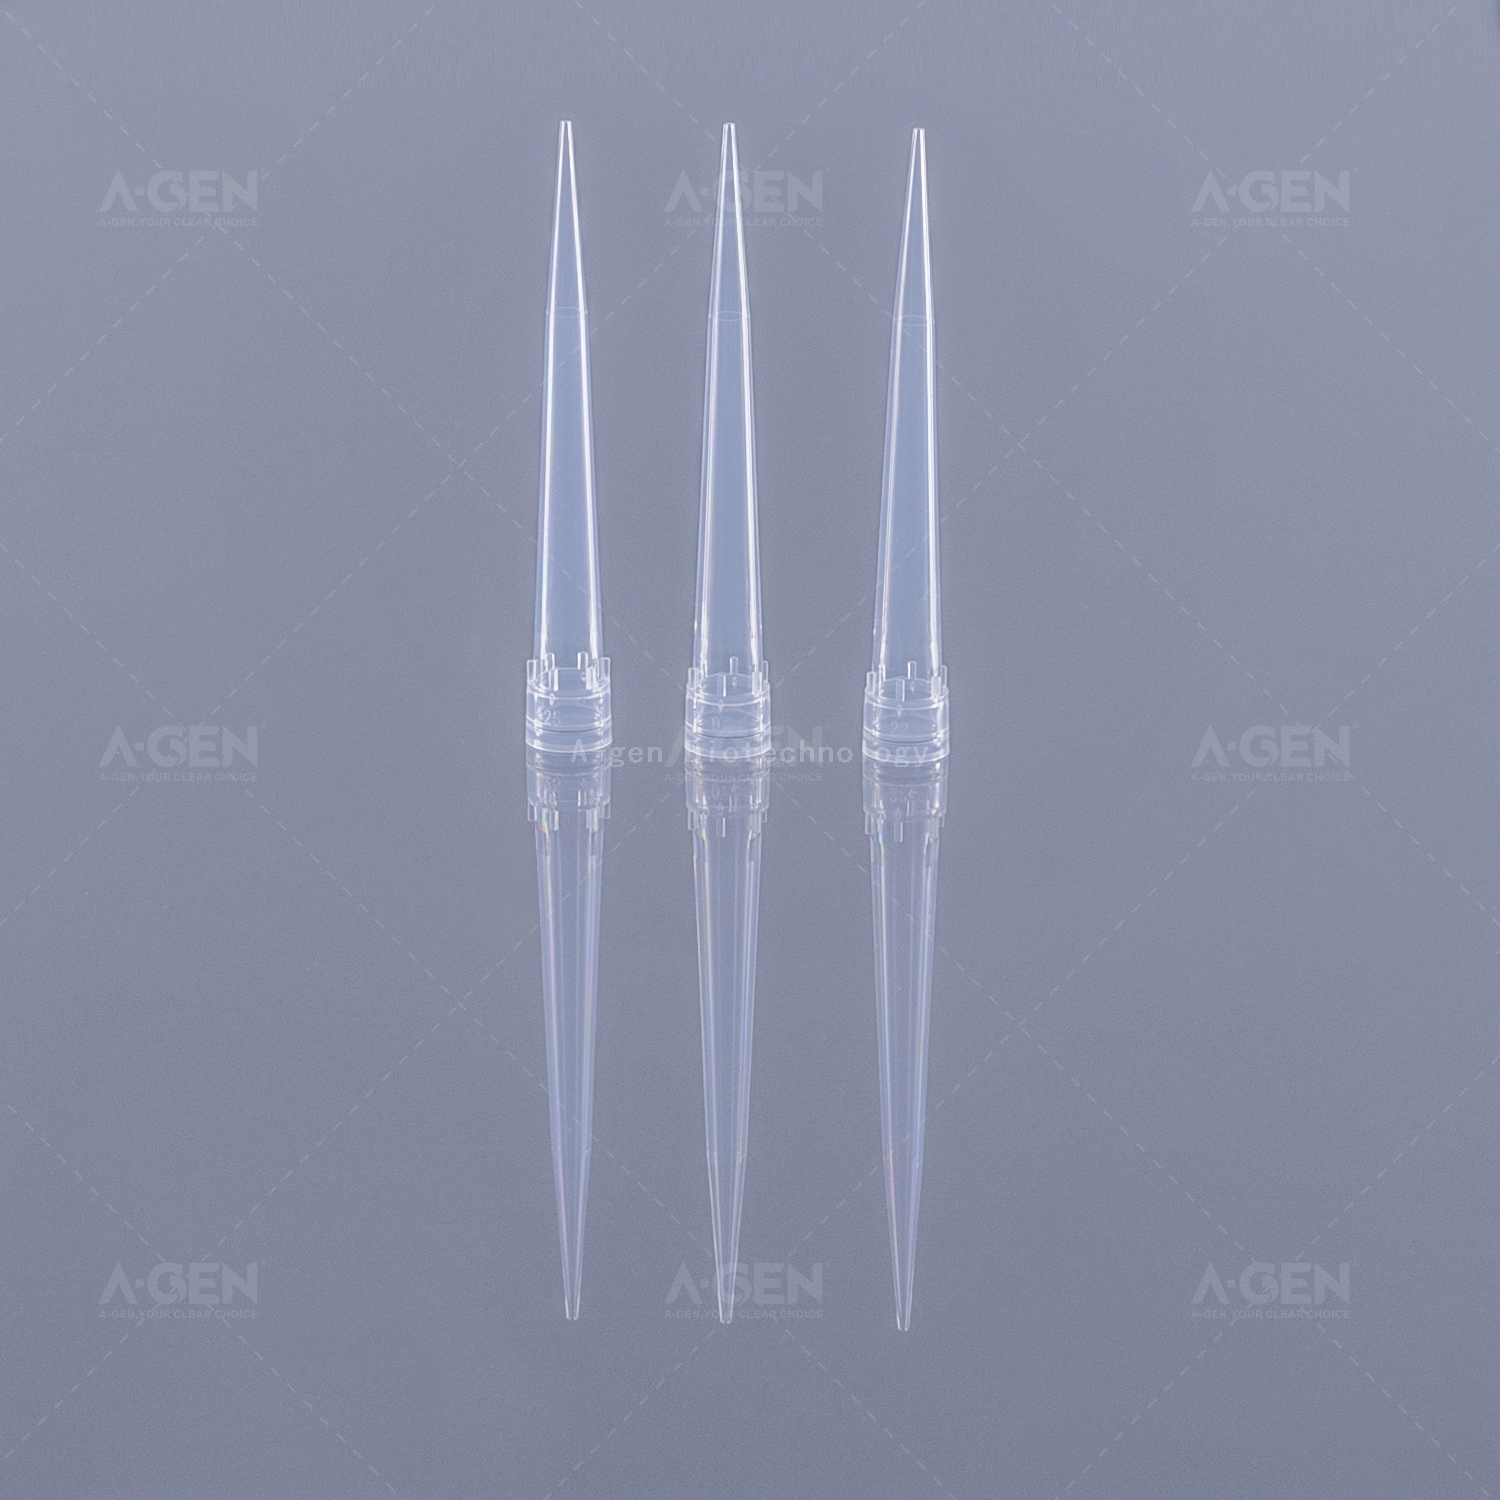 Hamilton Pipette Tip 300μL Sterile Clear PP Pipette Tip in Rack for Liquid Transfer Without Filter 